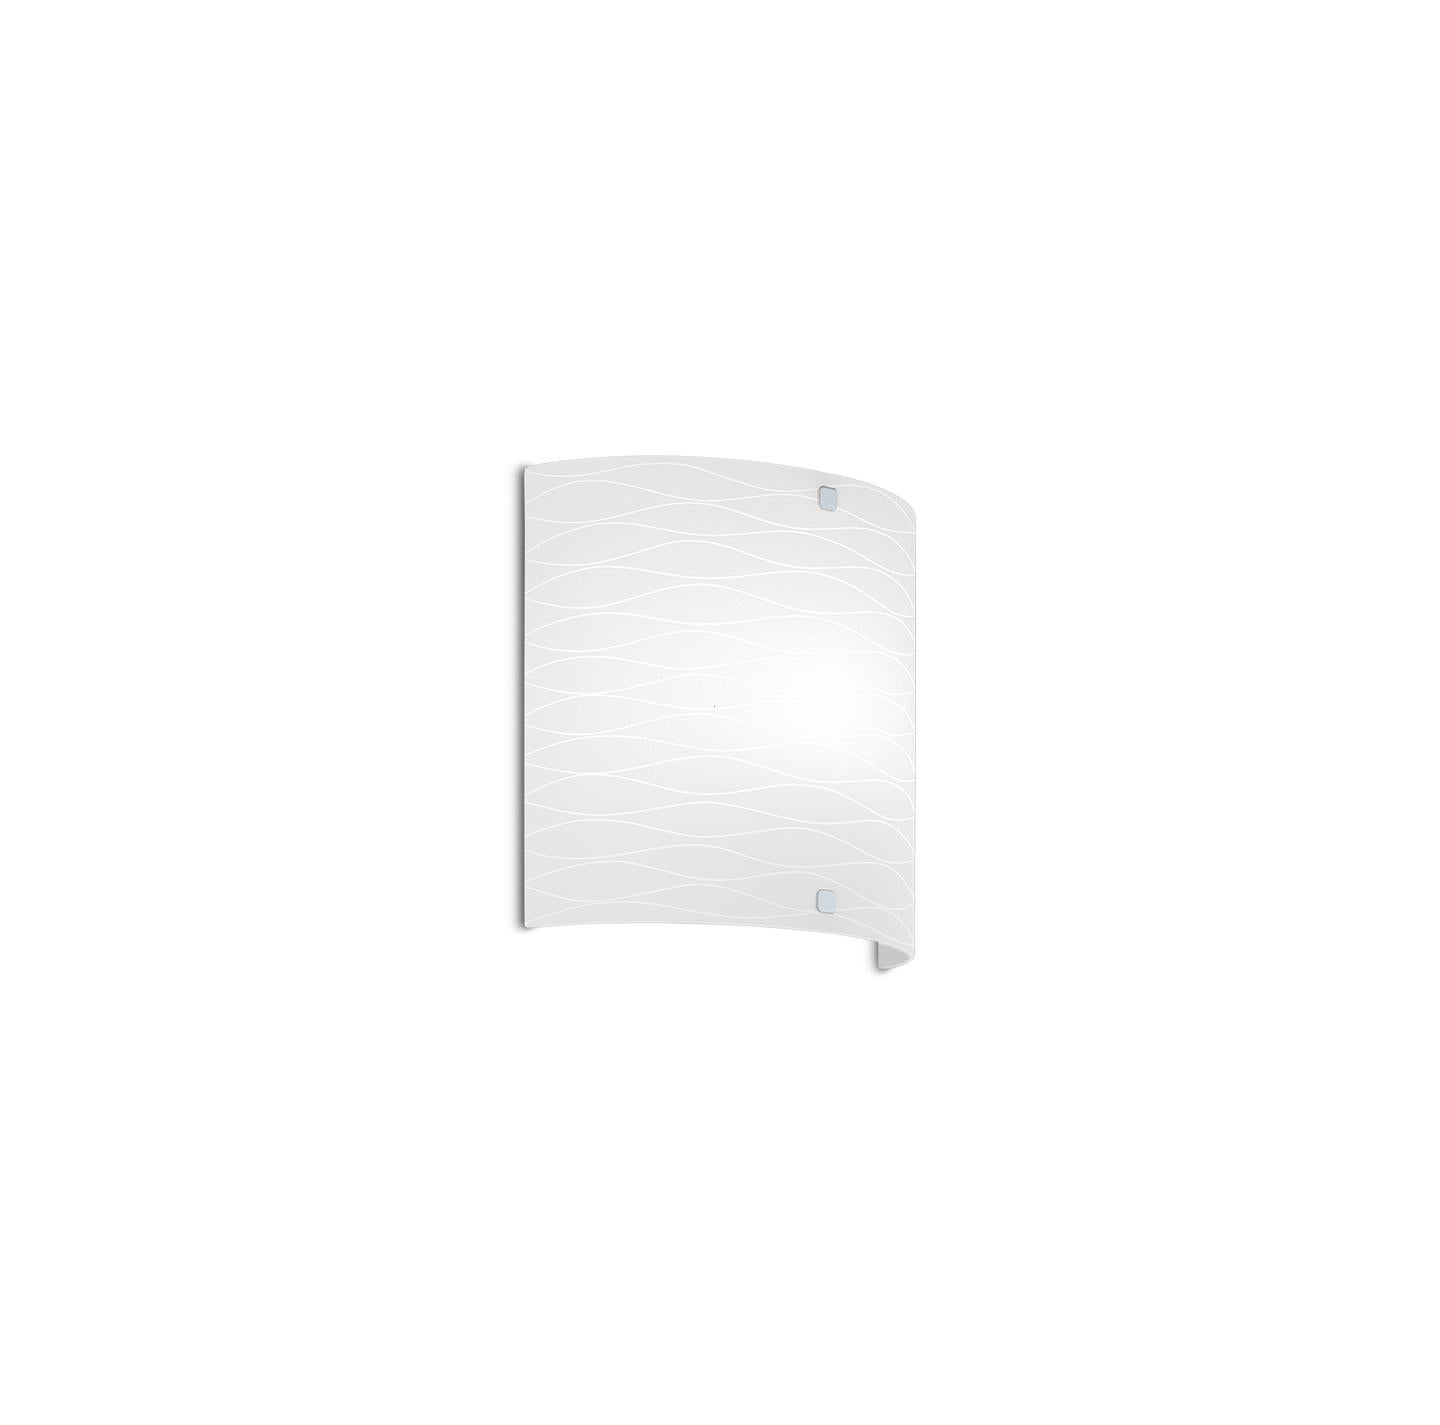 Leucos Class P Wall Light in Satin Milky White and Chrome by Design Lab For Sale